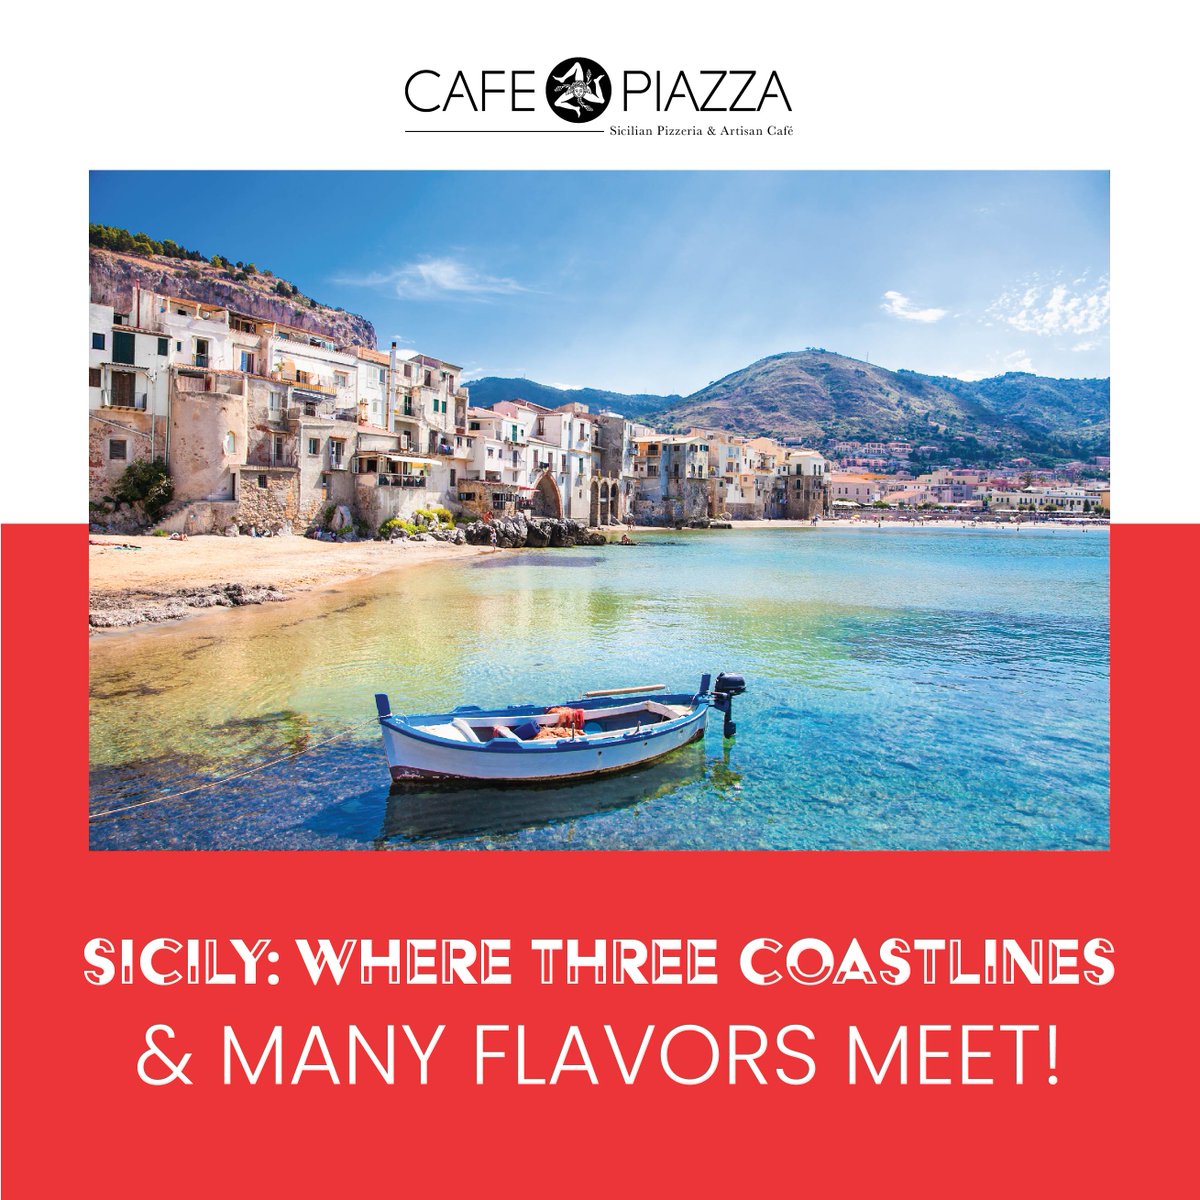 #DidYouKnow Sicily is home to three separate coasts? Our Sicilian cooking is as vast as those coastlines, bringing you the freshest, most delectable treasures from the sea. #SicilianHistory #threecapes #CafePiazzaDelights